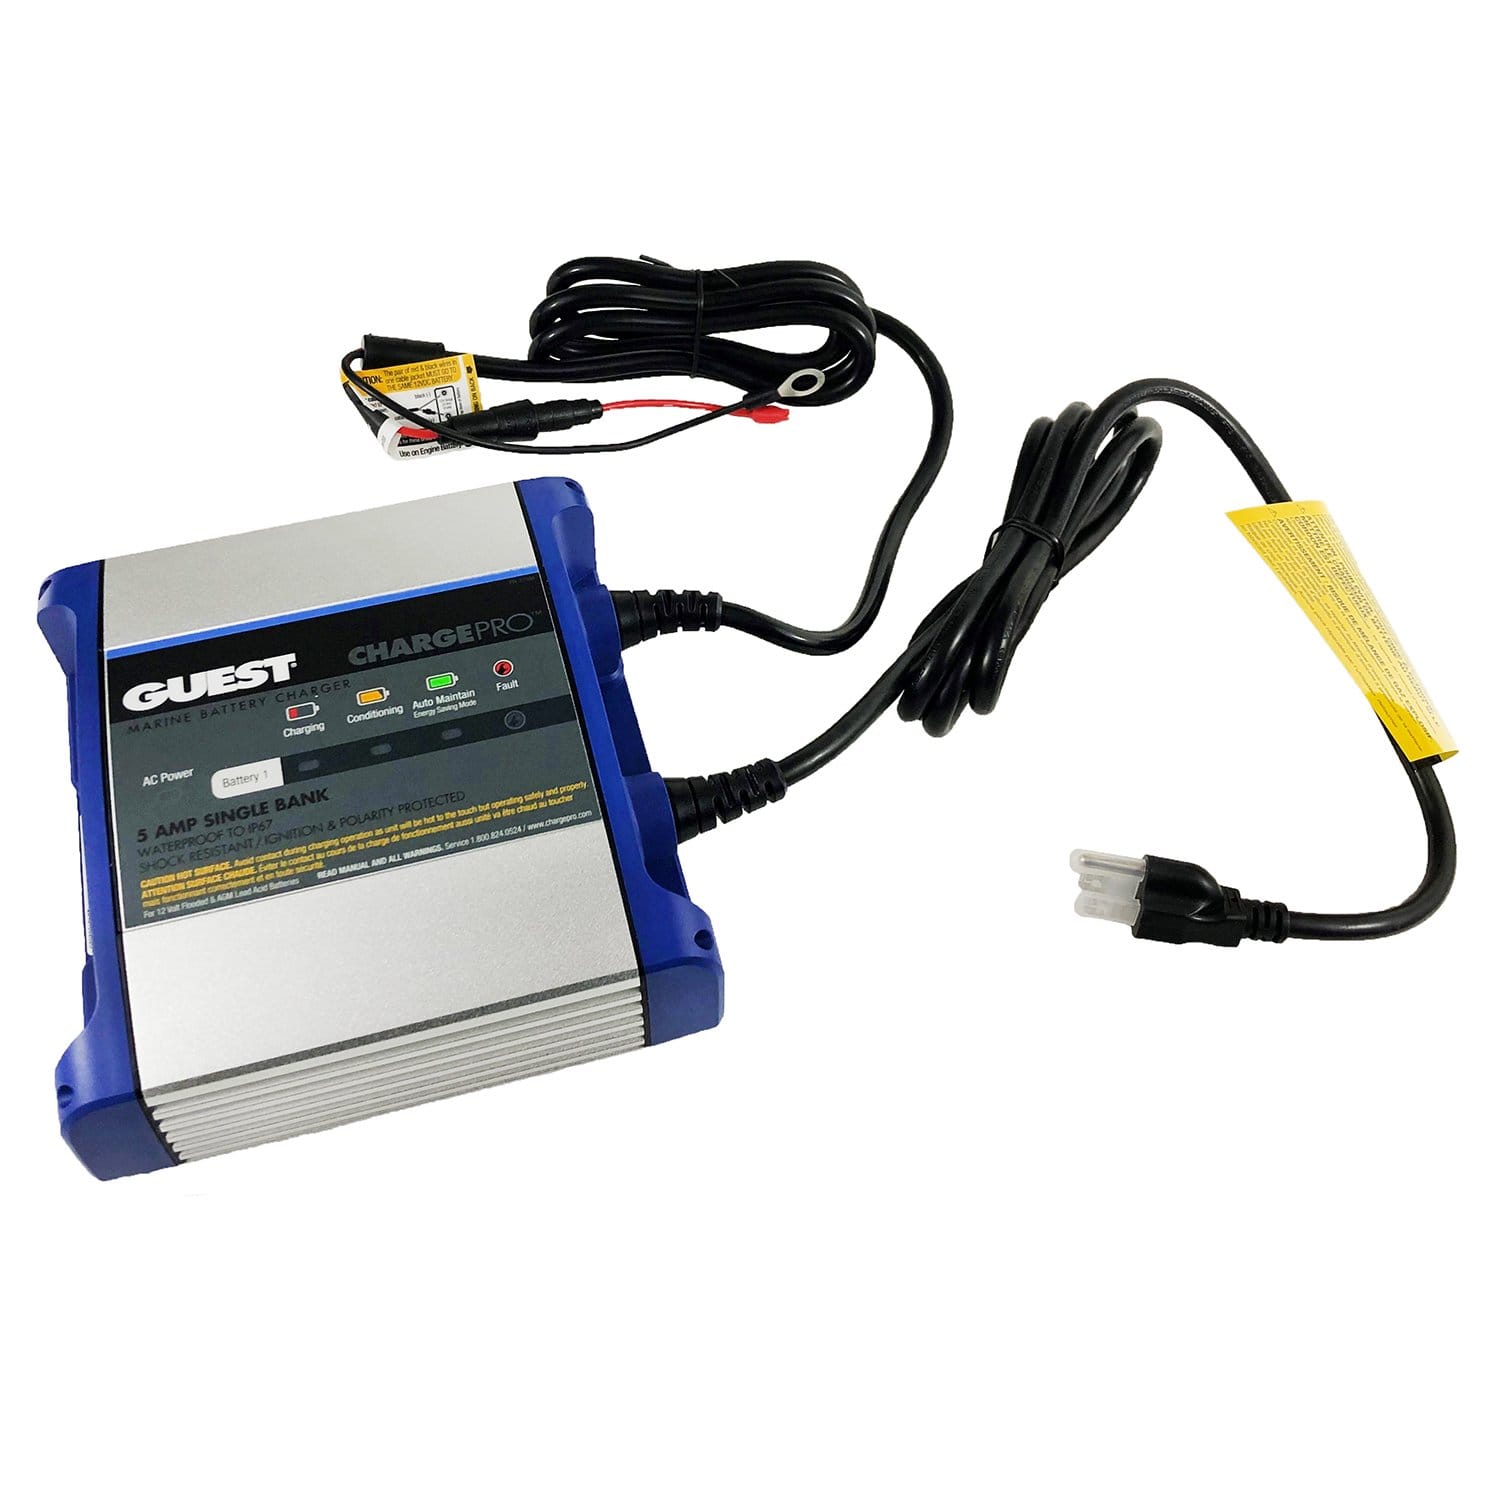 Guest On-Board 5A/ 12V 1 Bank 120V Input Battery Charger